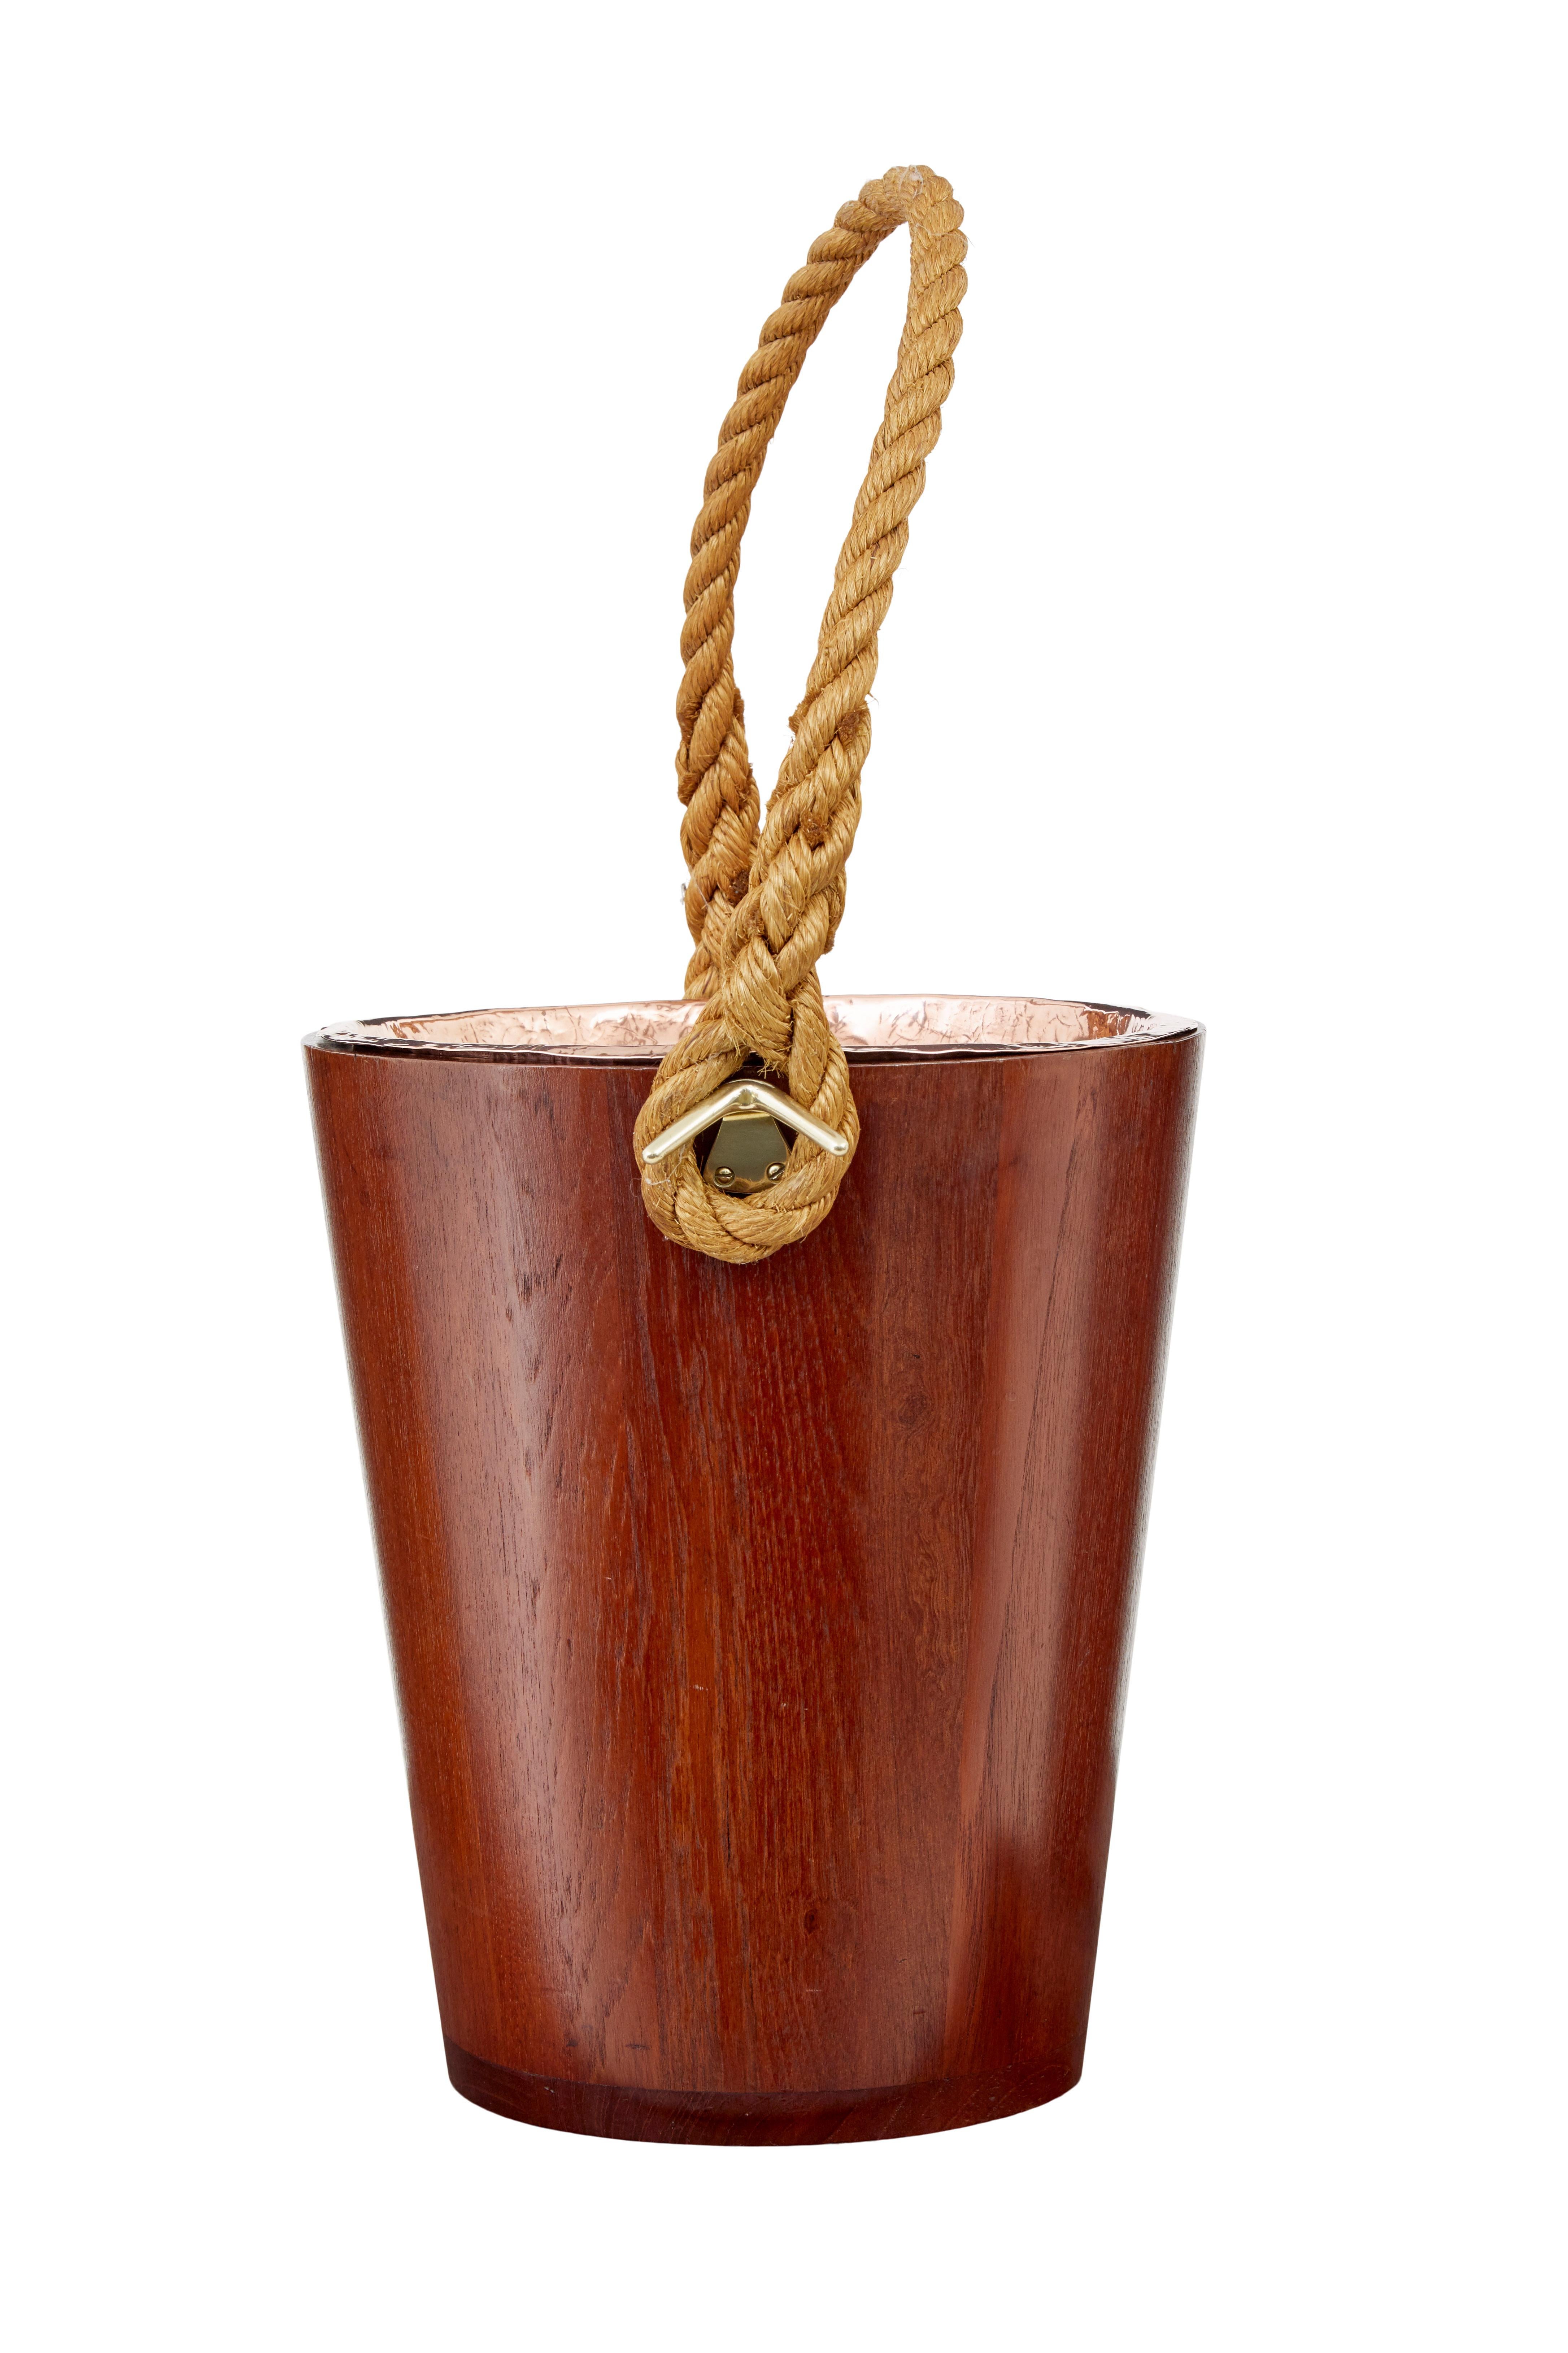 Decorative 20th century teak bucket with rope handle circa 1950.

Ideal for use as a waste paper basket or a kindling bin beside the fire.  Teak bucket with removable copper dish.

Minor surface marks.